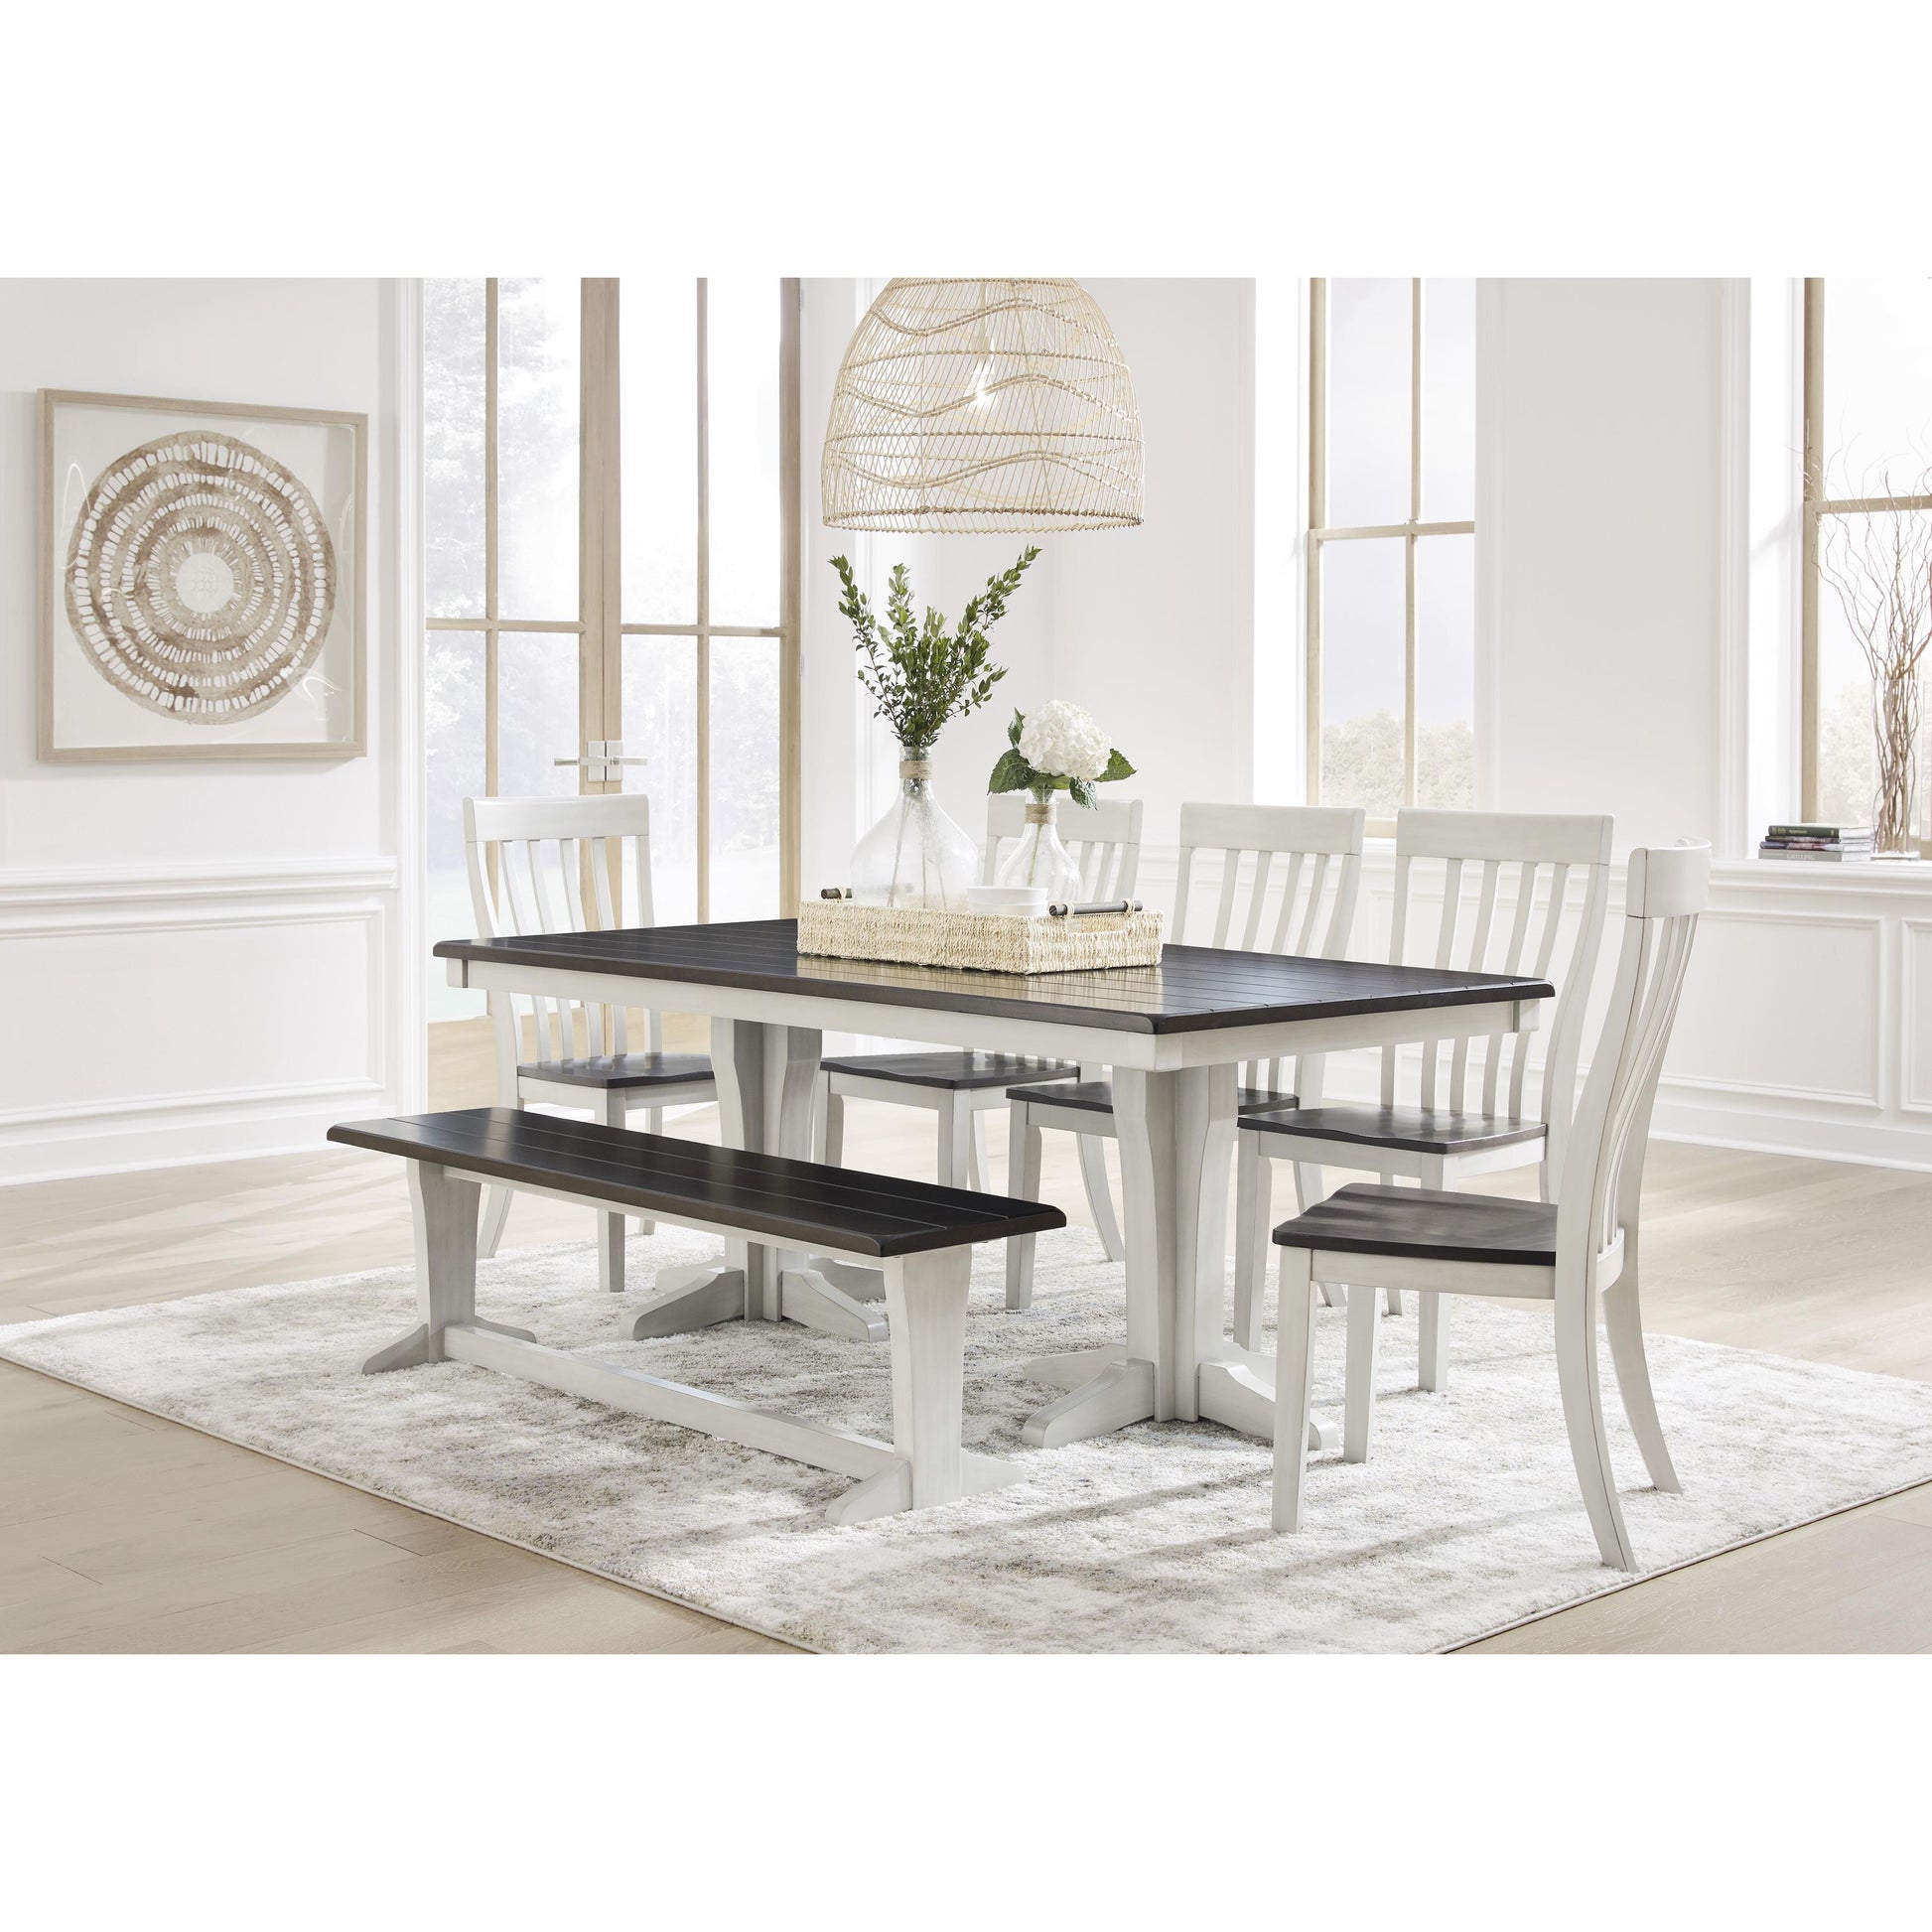 Signature Design by Ashley Darborn Dining Table D796-25B/D796-25T IMAGE 12